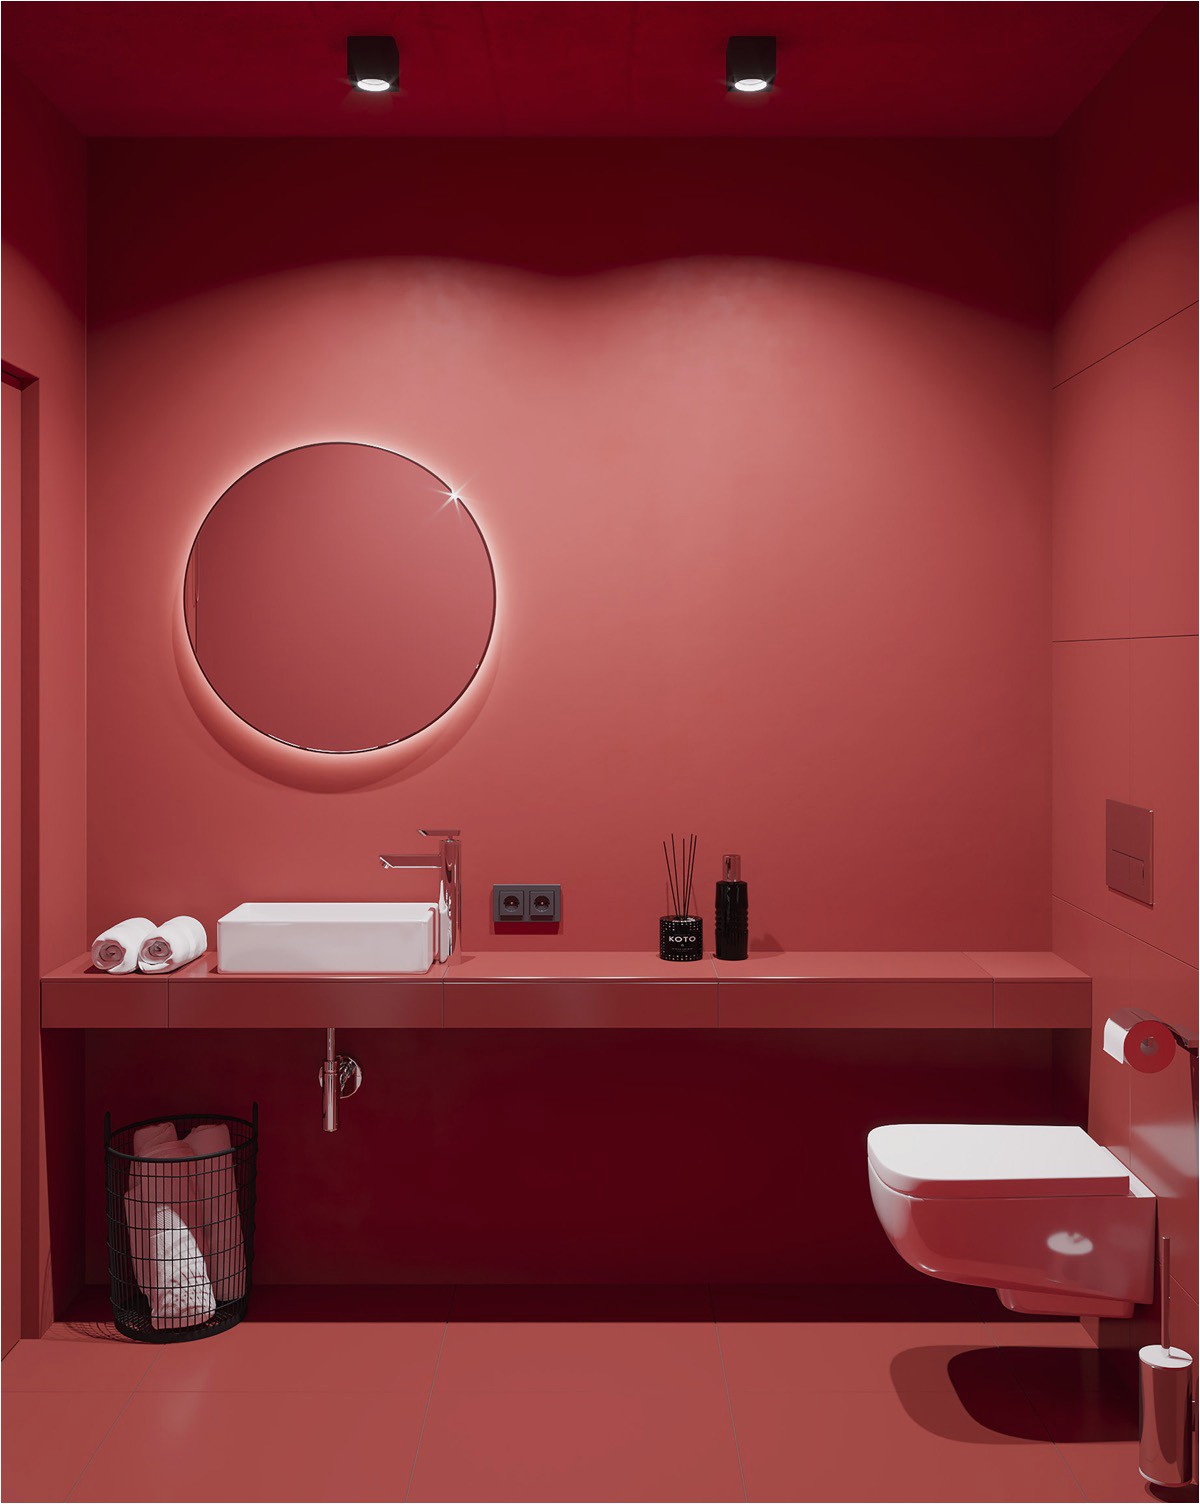 Dark Red Bathroom Rugs 51 Red Bathrooms Design Ideas with Tips to Decorate and